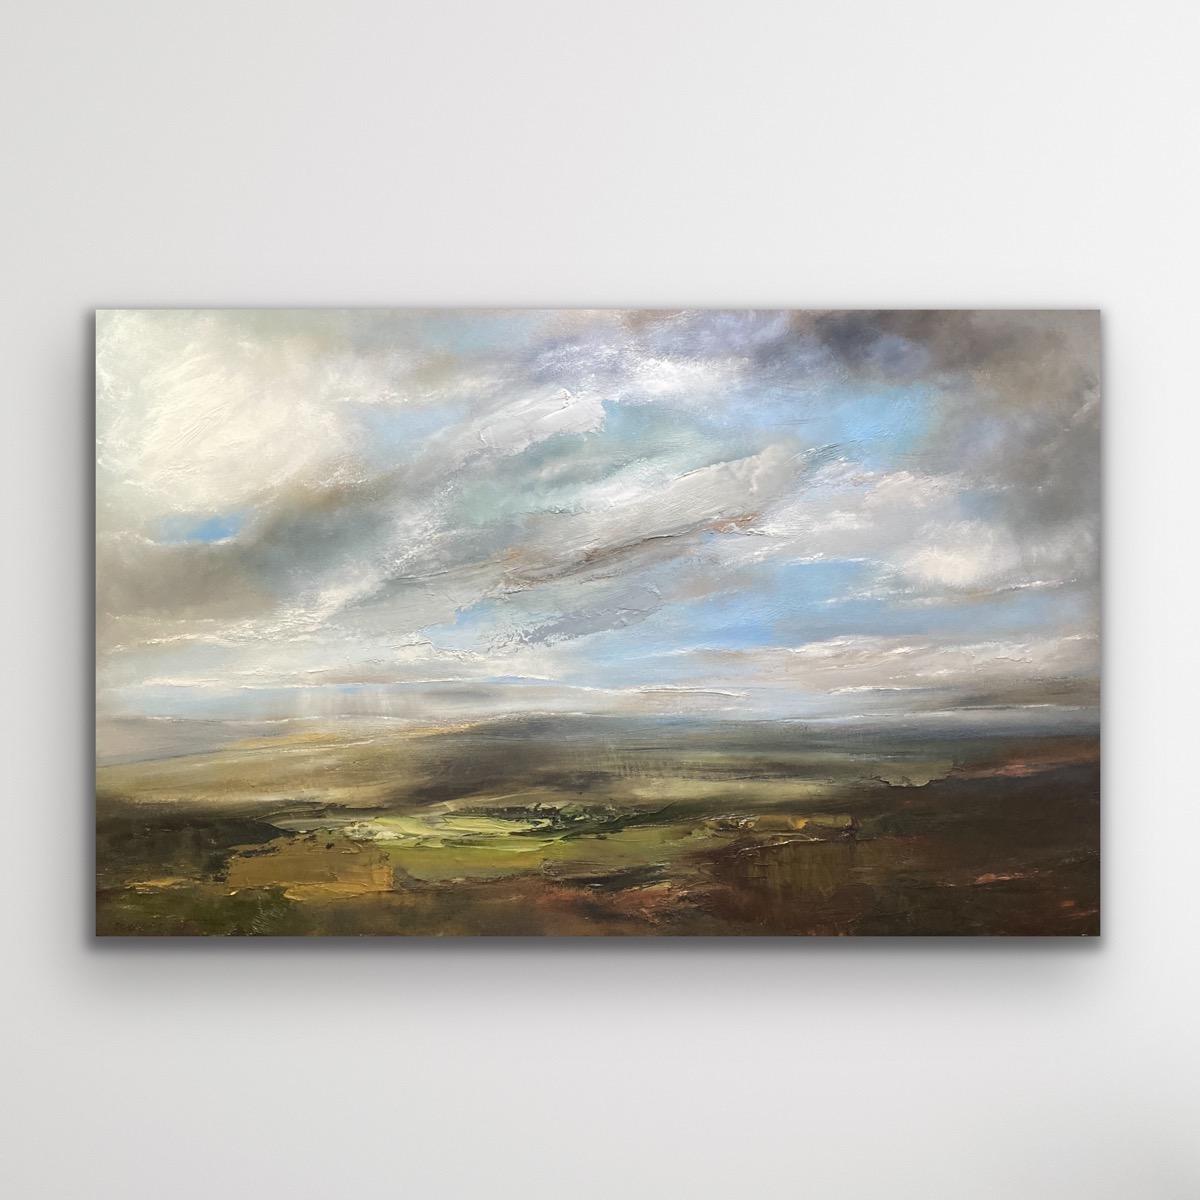 At Peace by Helen Howells, Landscape painting, Horizon, Rambling 2